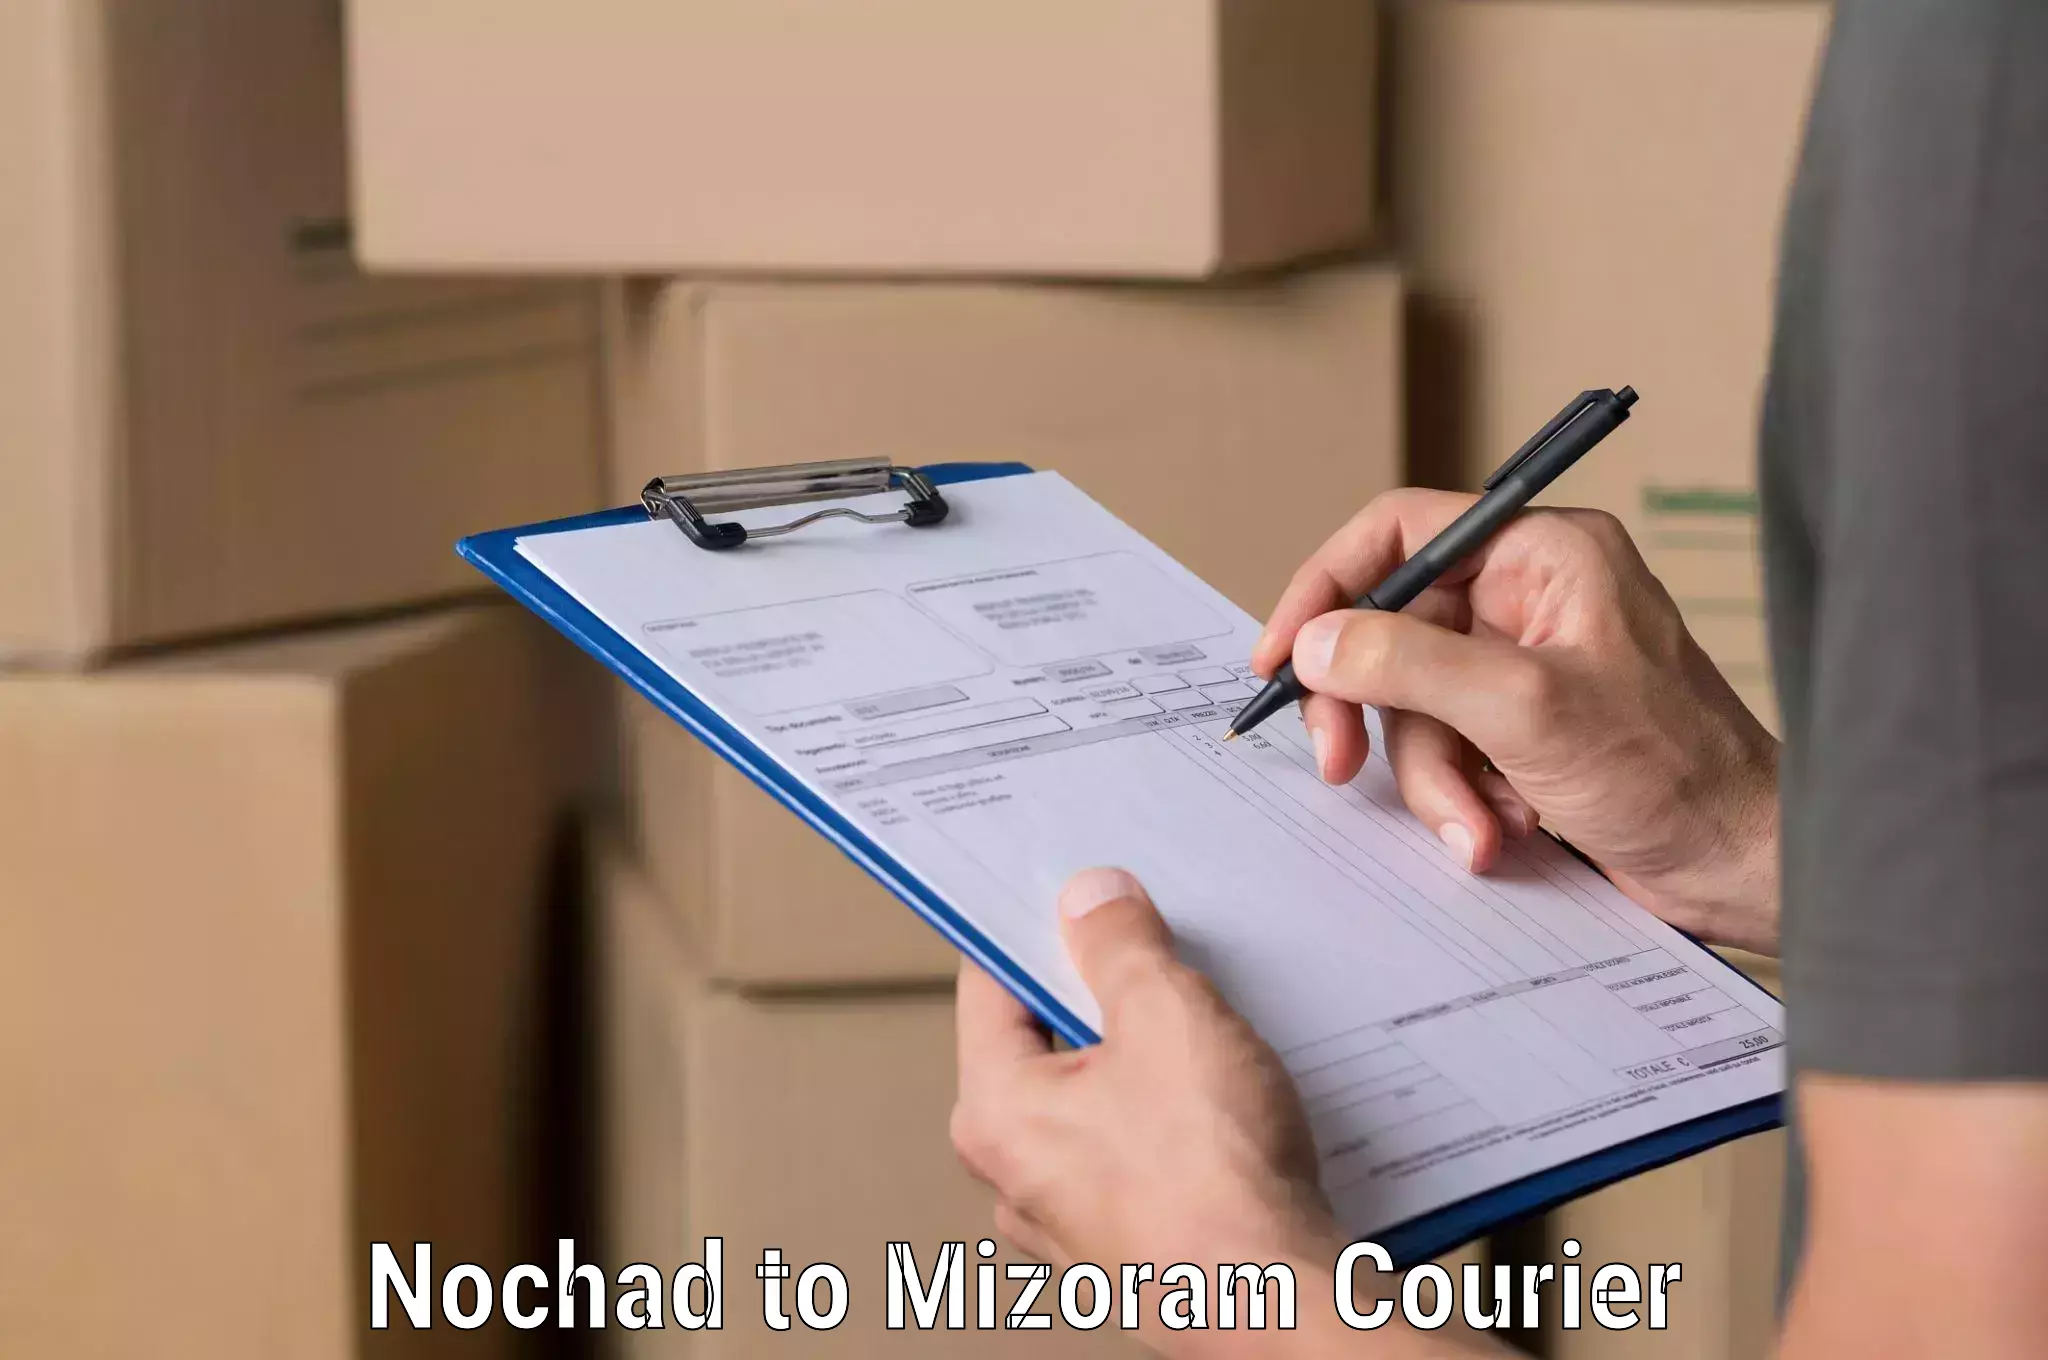 Courier service innovation Nochad to Darlawn